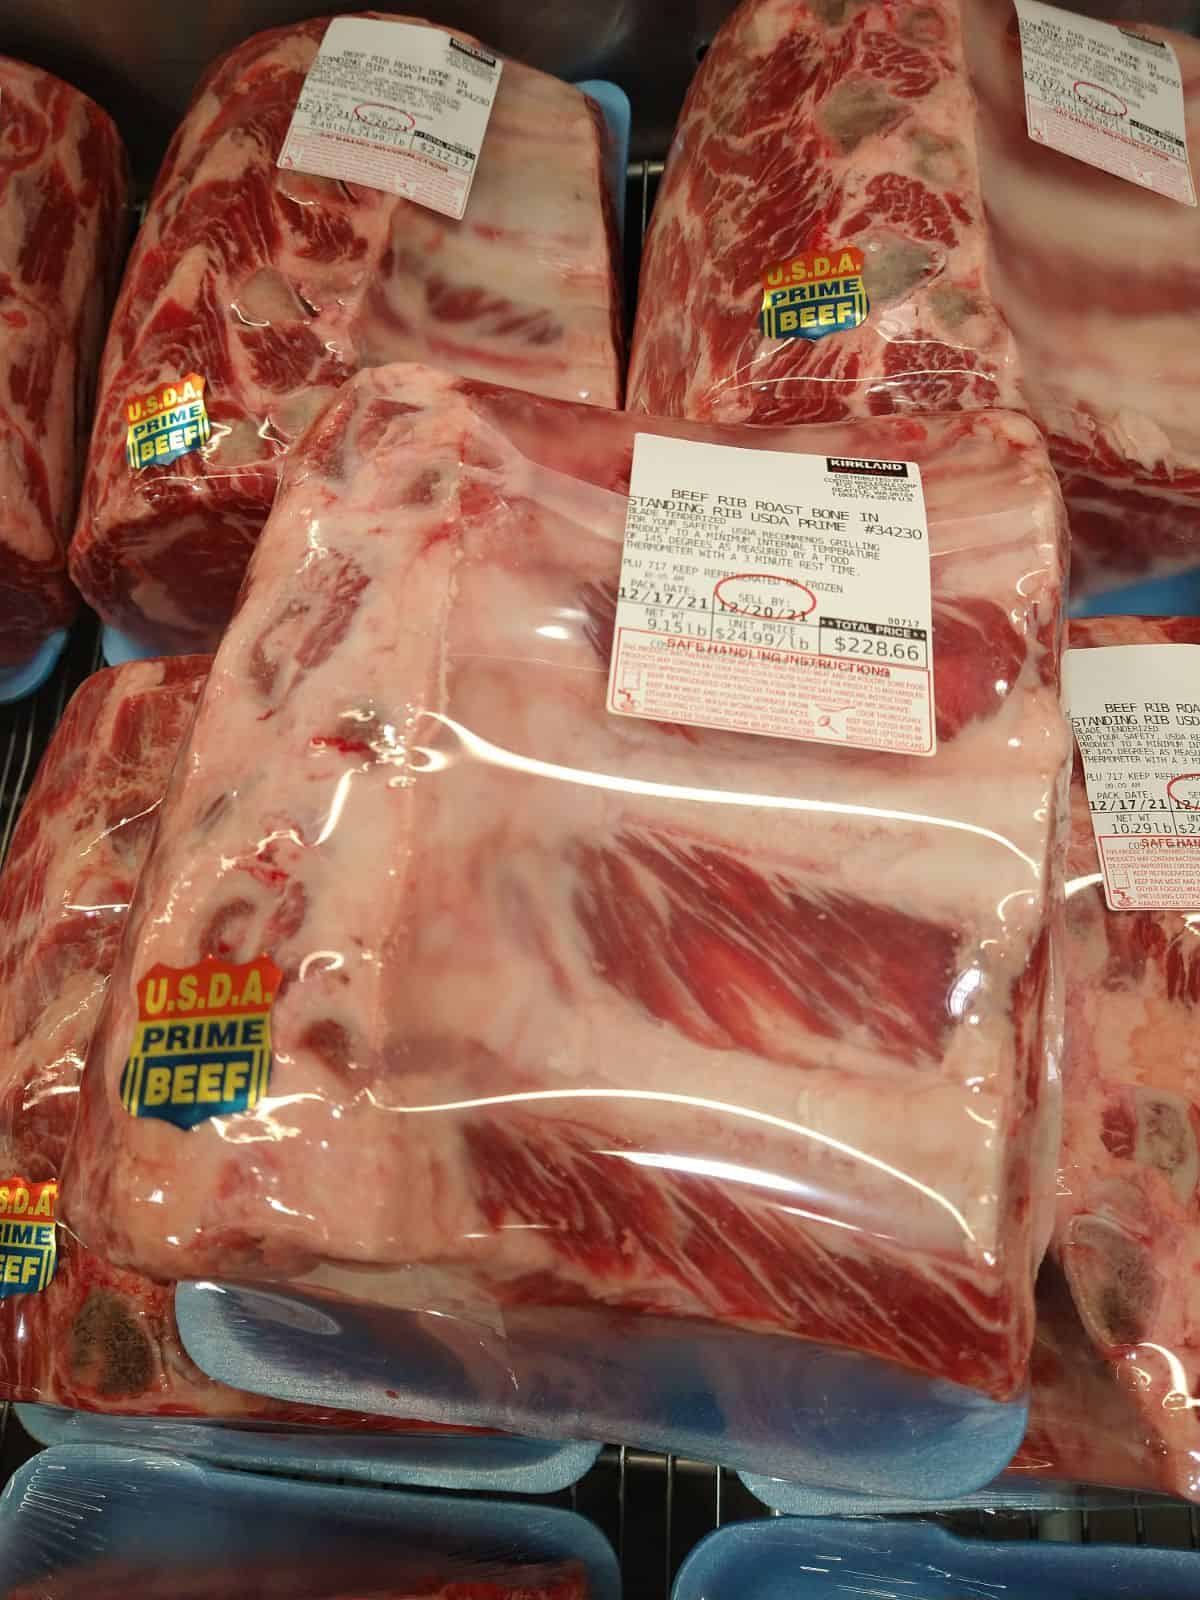 Packaged Prime Standing Rib Roasts on display at Costco.